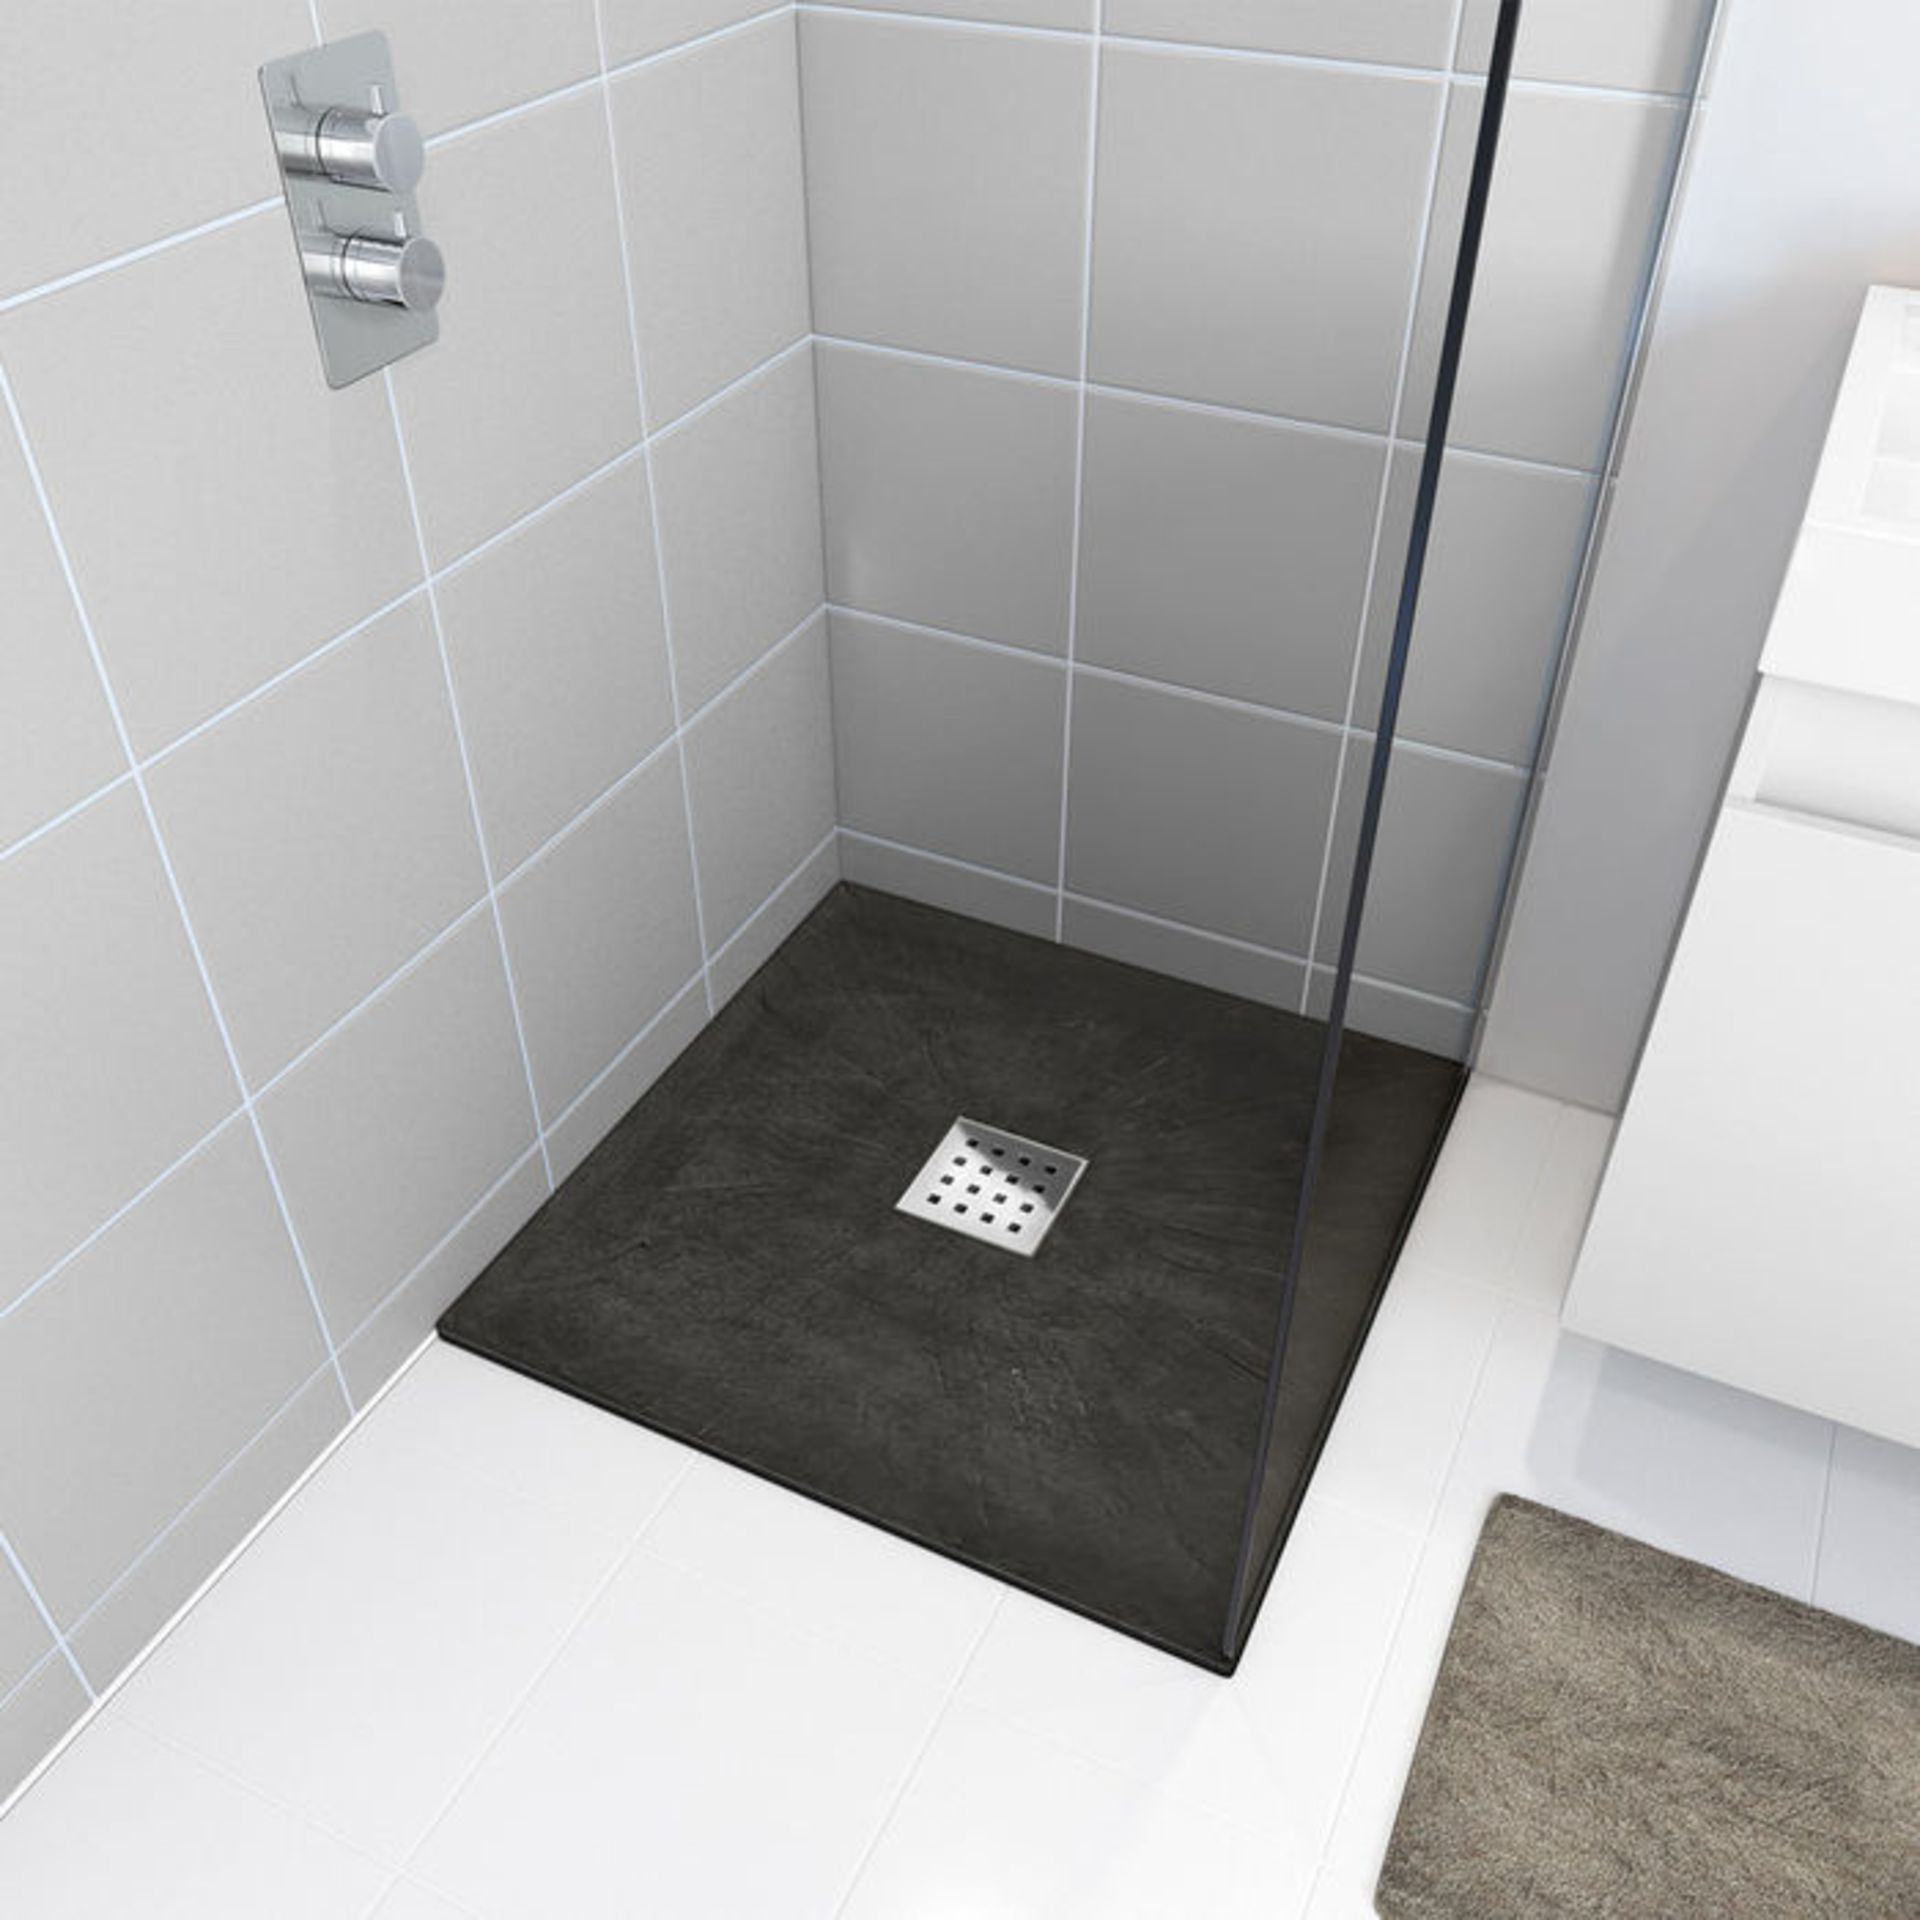 NEW 900x900mm Square Slate Effect Shower Tray & Chrome Waste. Handcrafted from high-grade stone...